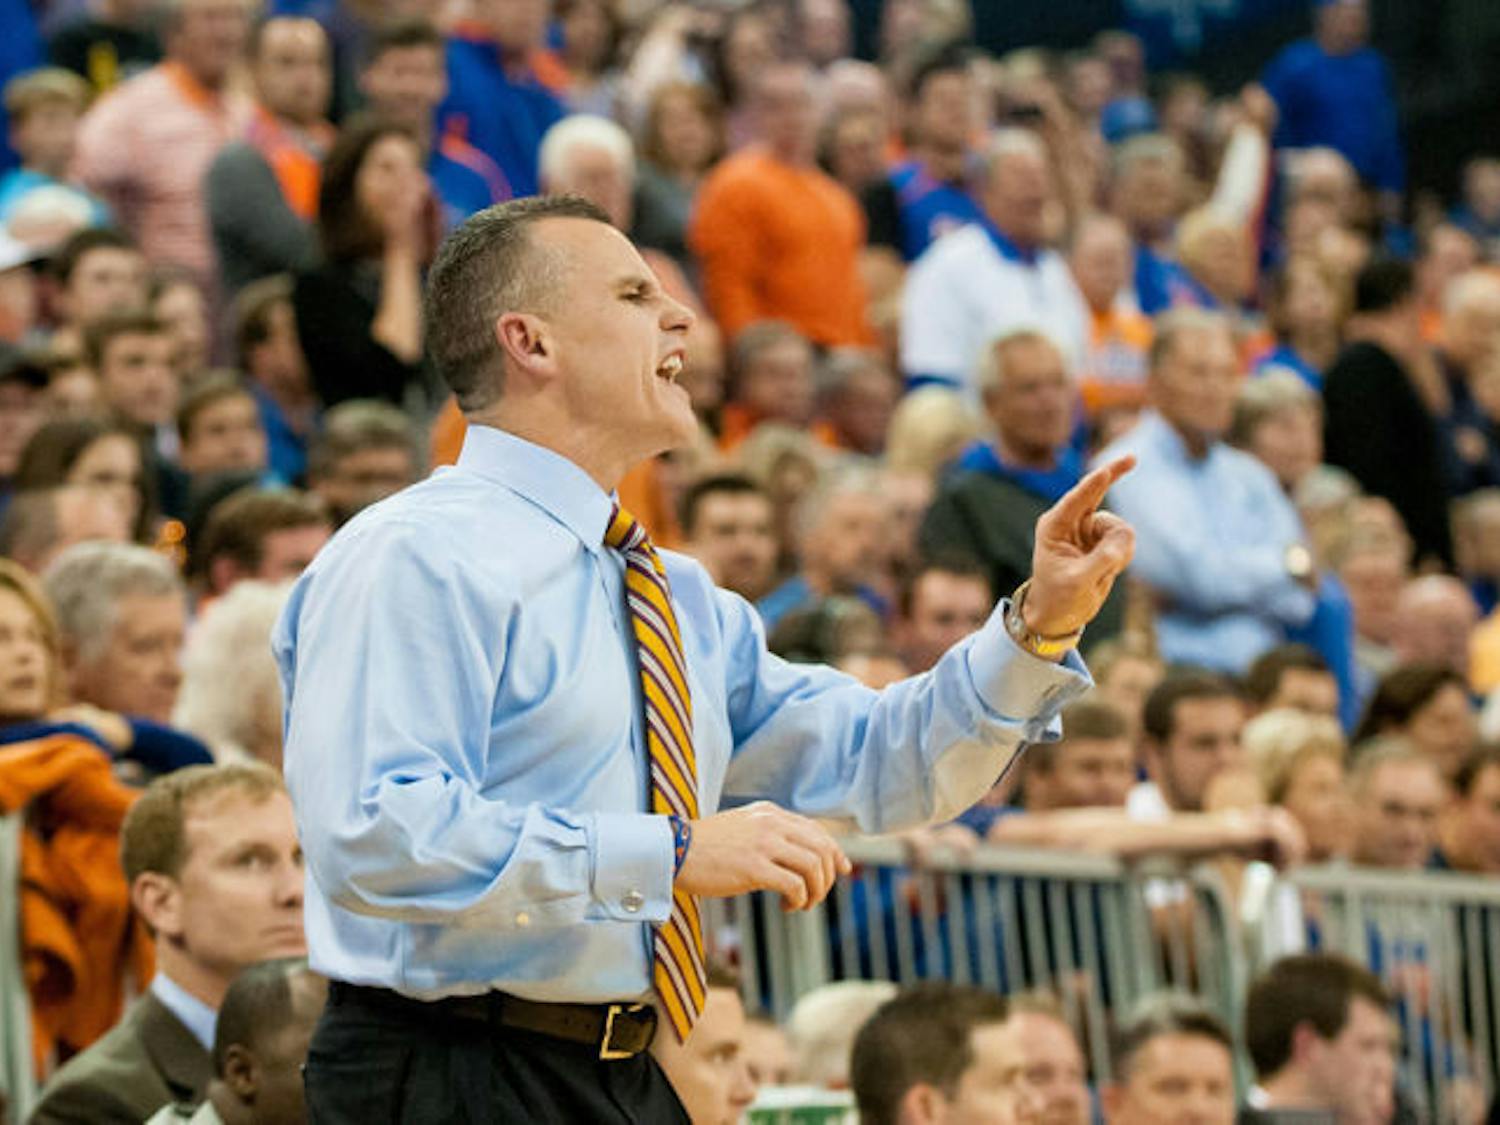 Billy Donovan looks down the court during Florida’s 67-61 win against Kansas on Dec. 10, 2013 in the O’Connell Center. On Monday, Donovan said this year’s Gators are different compared to his back-to-back title-winning teams.